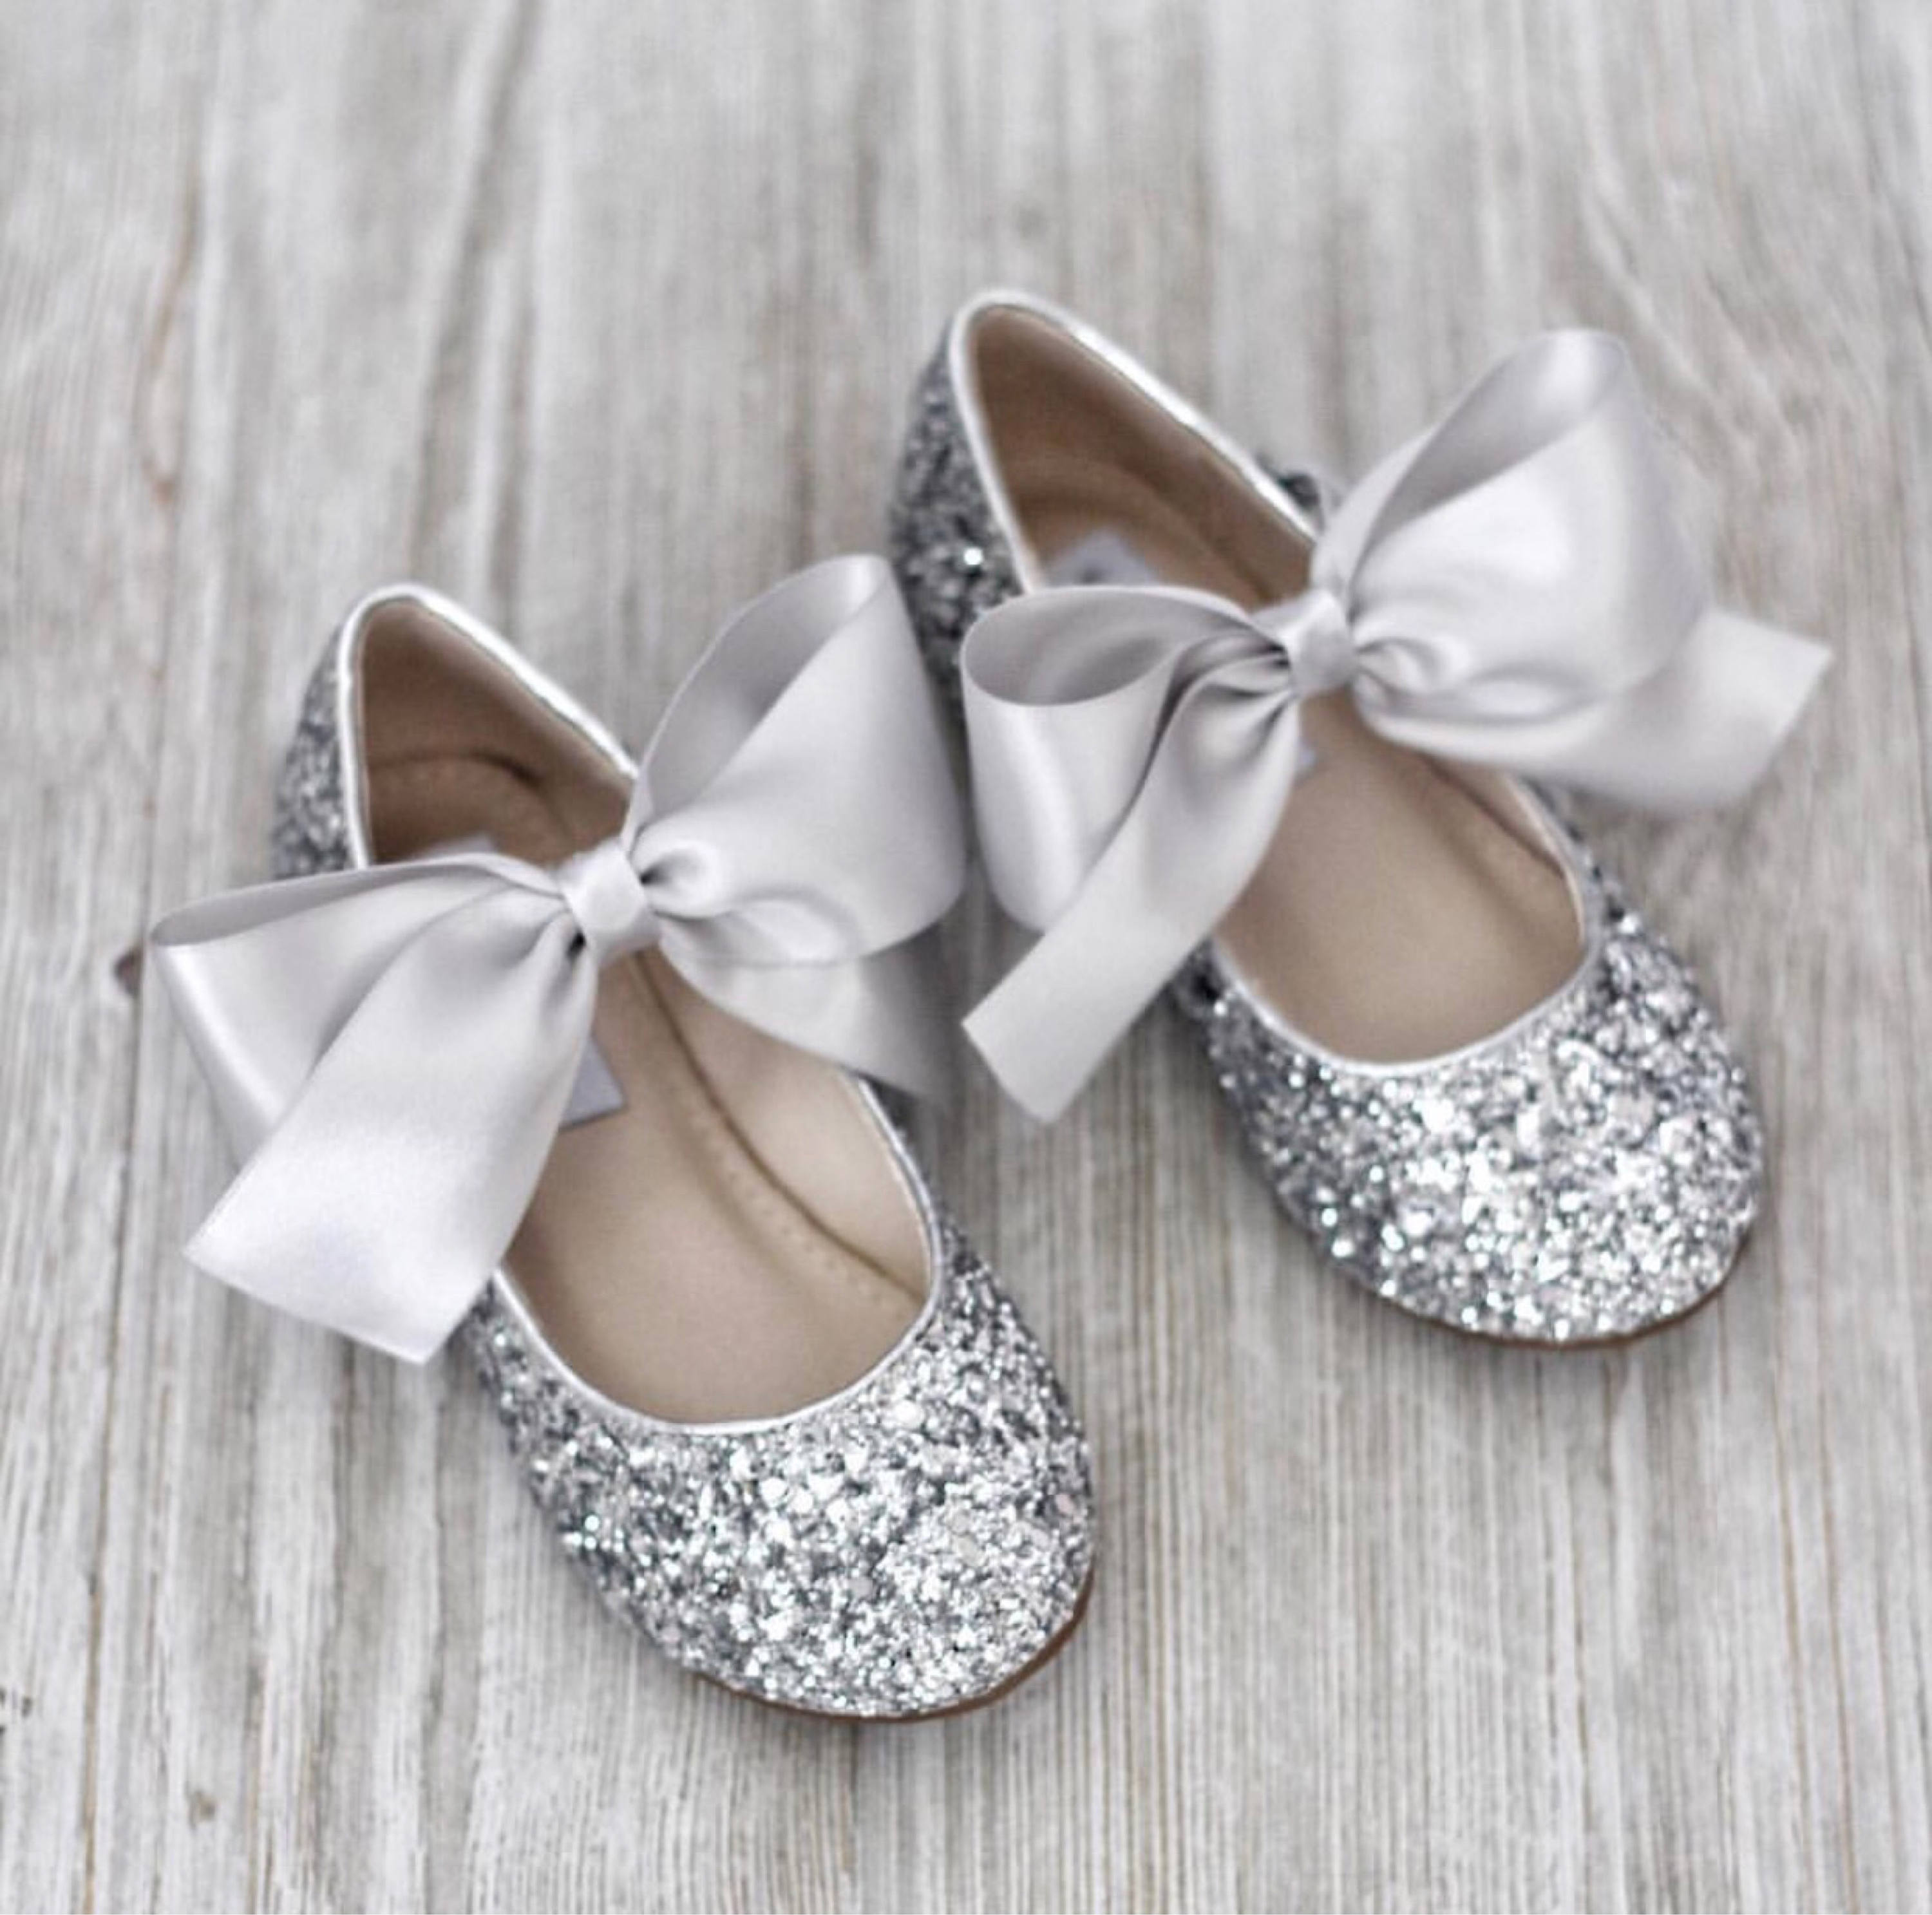 flower girl converse shoes